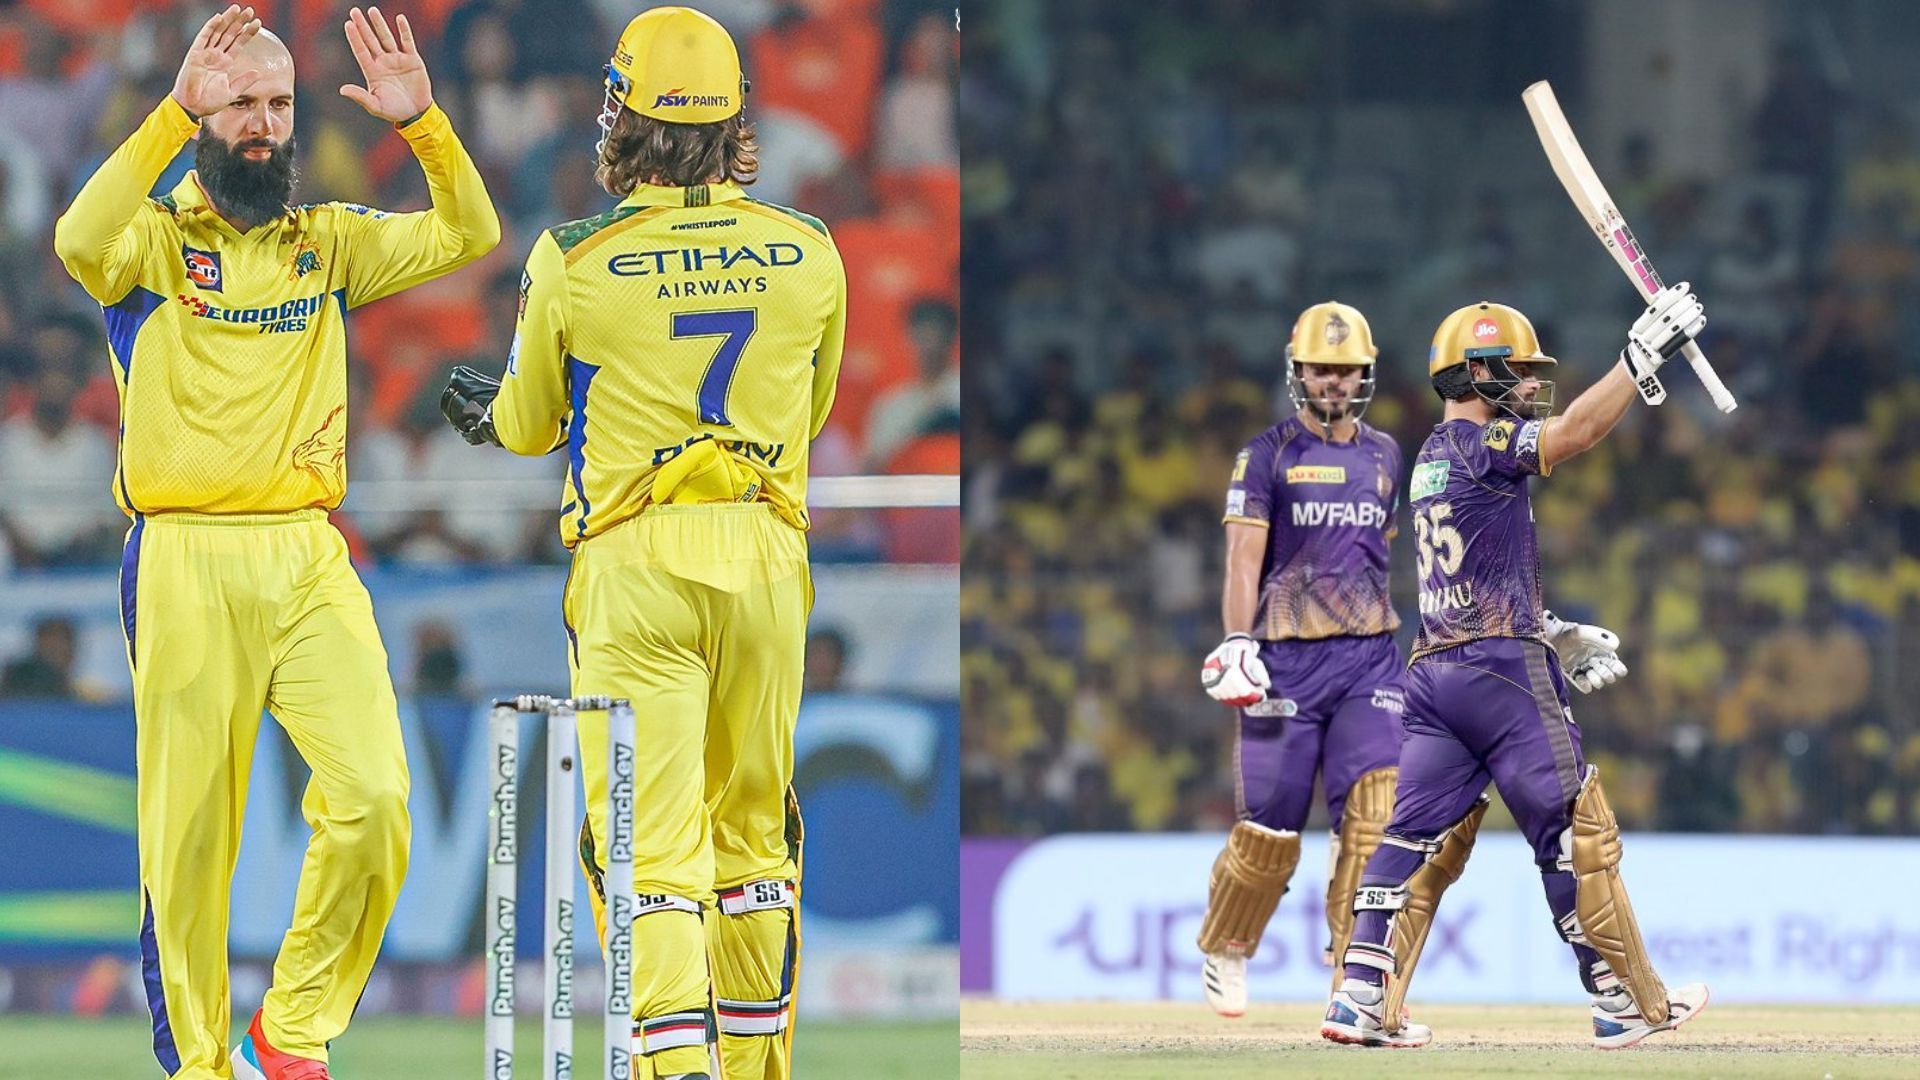 Chennai would be desperate to bring their campaign back on track against rampant KKR.